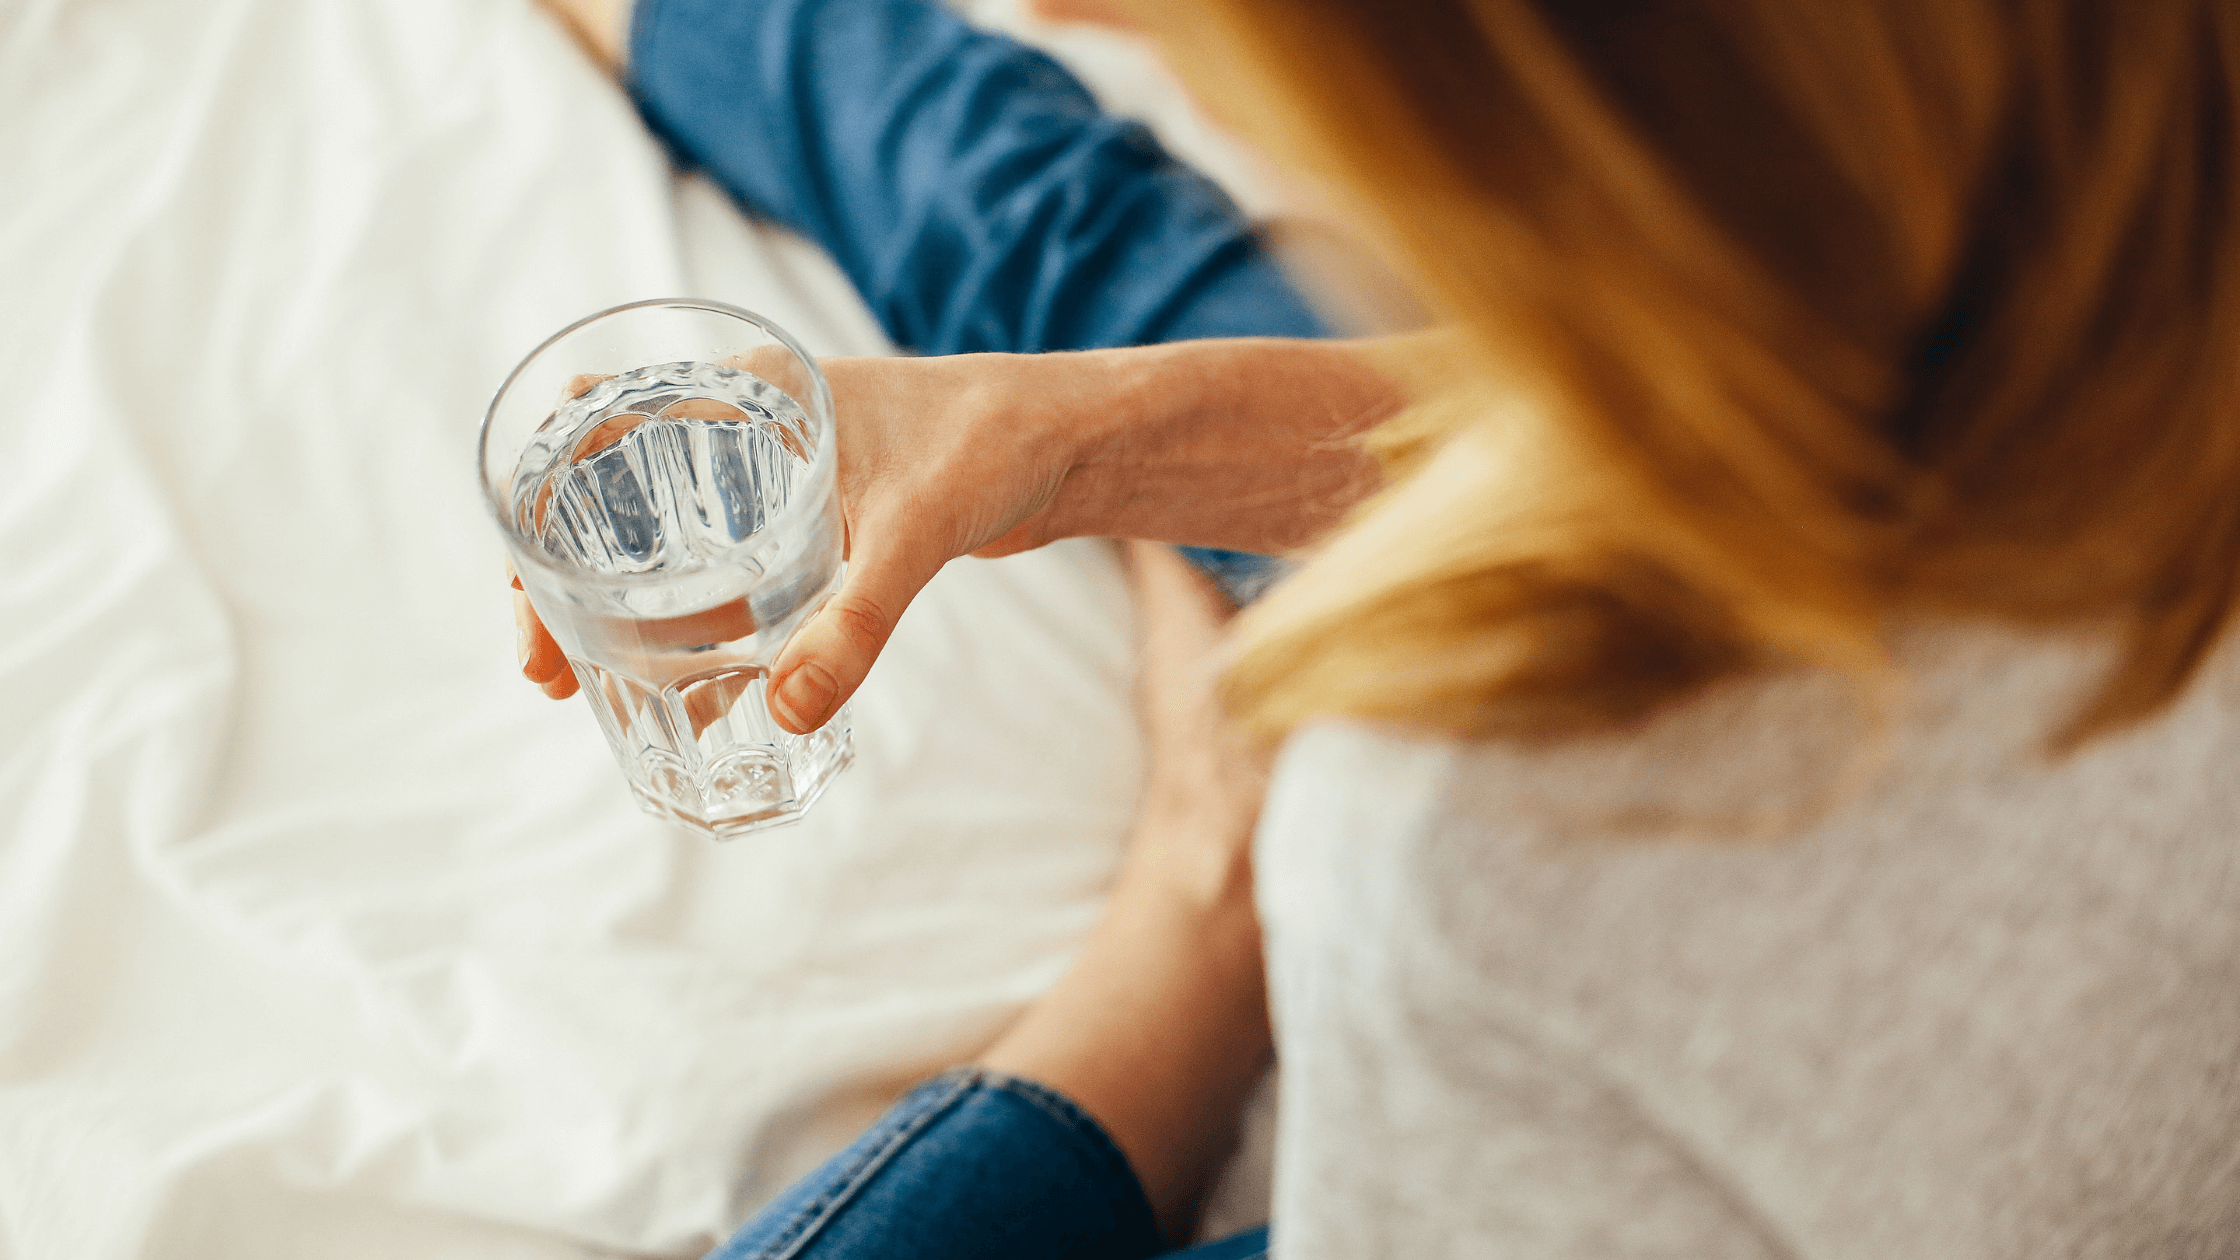 Hydration Tips: How Much Water Should You Drink?